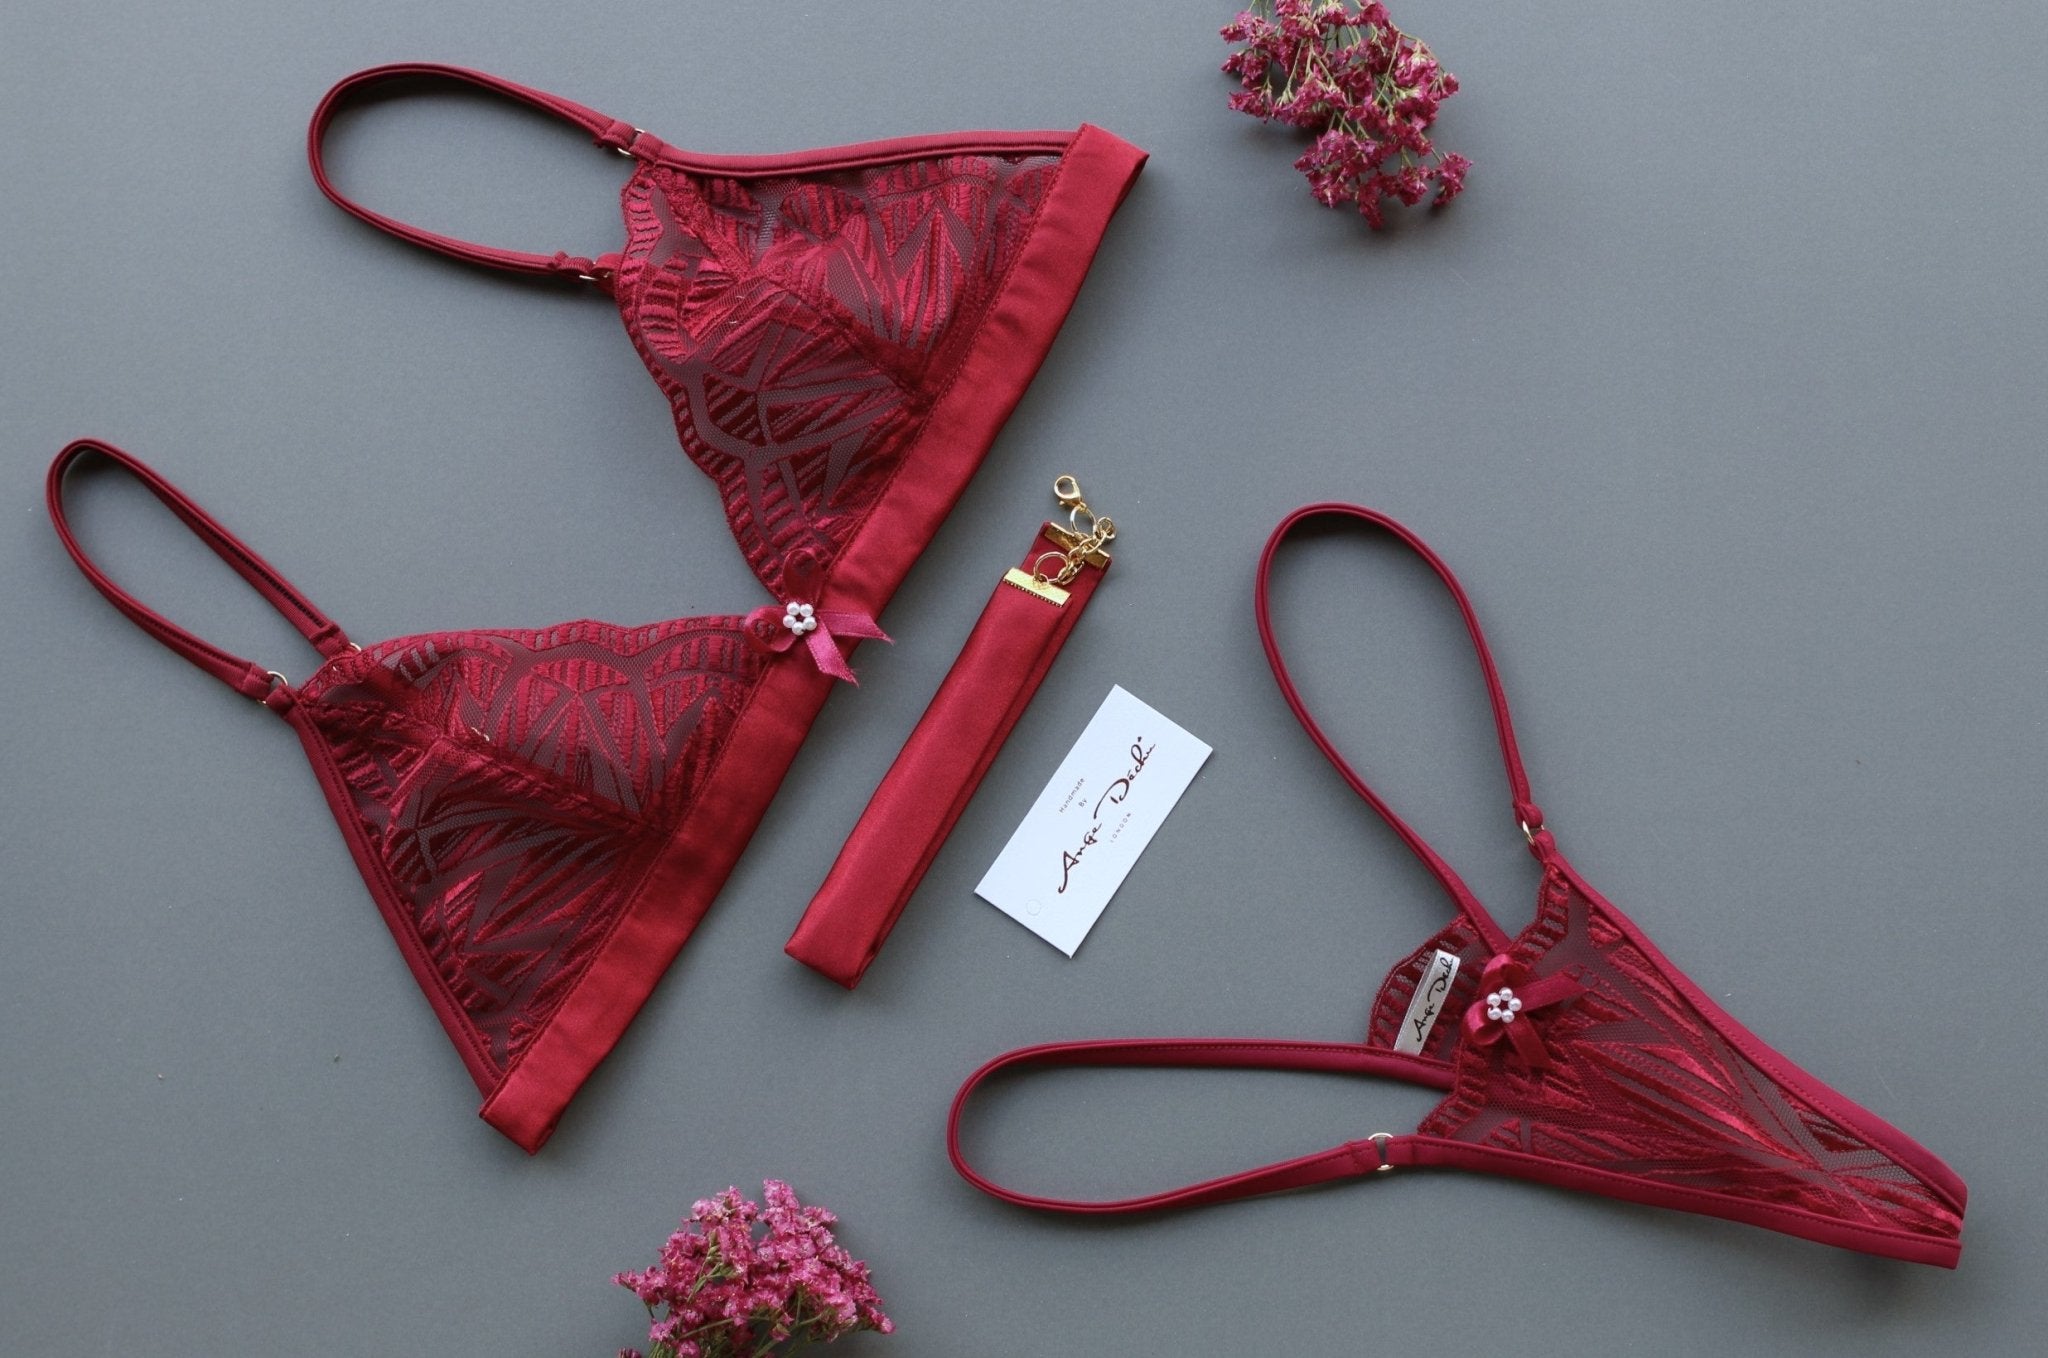 Sheer lingerie set with G string panties in see through burgundy red lace sexy boudoir lingerie - Ange Déchu